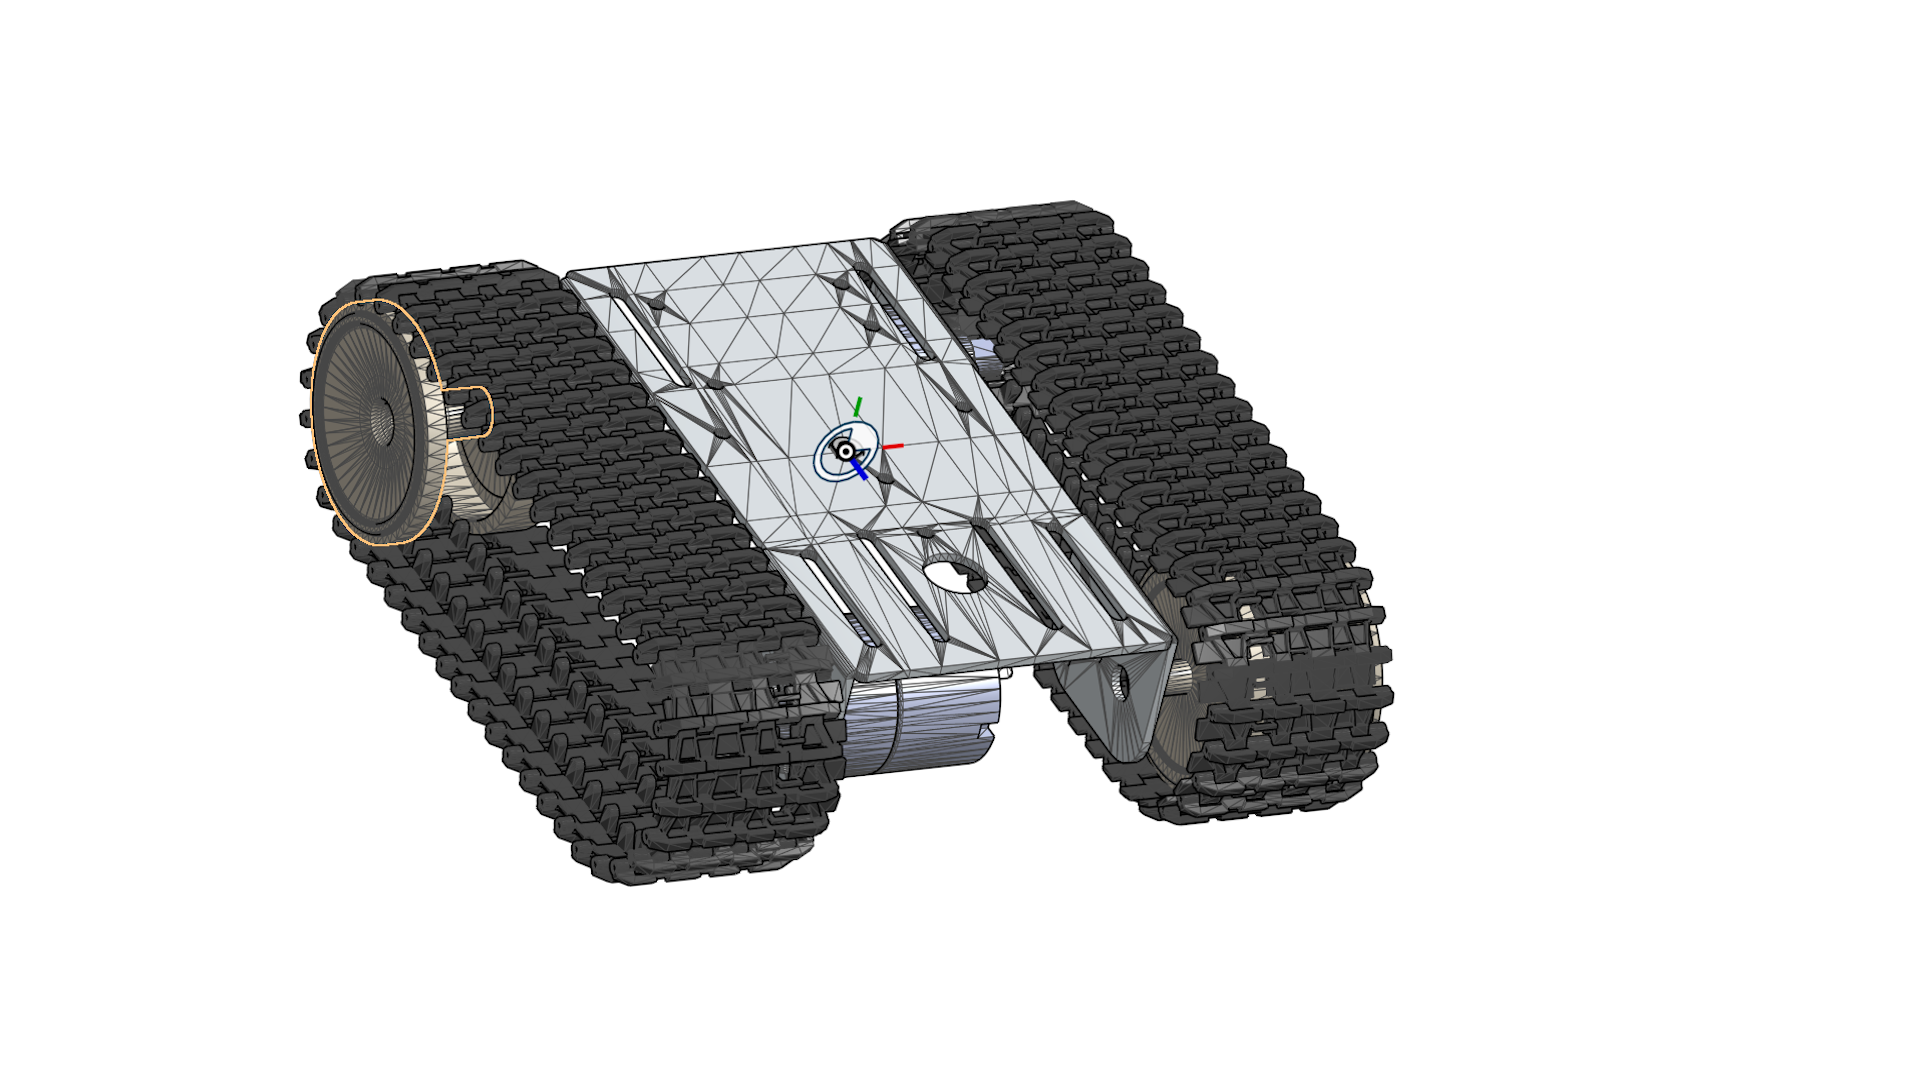 Chassis CAD Model